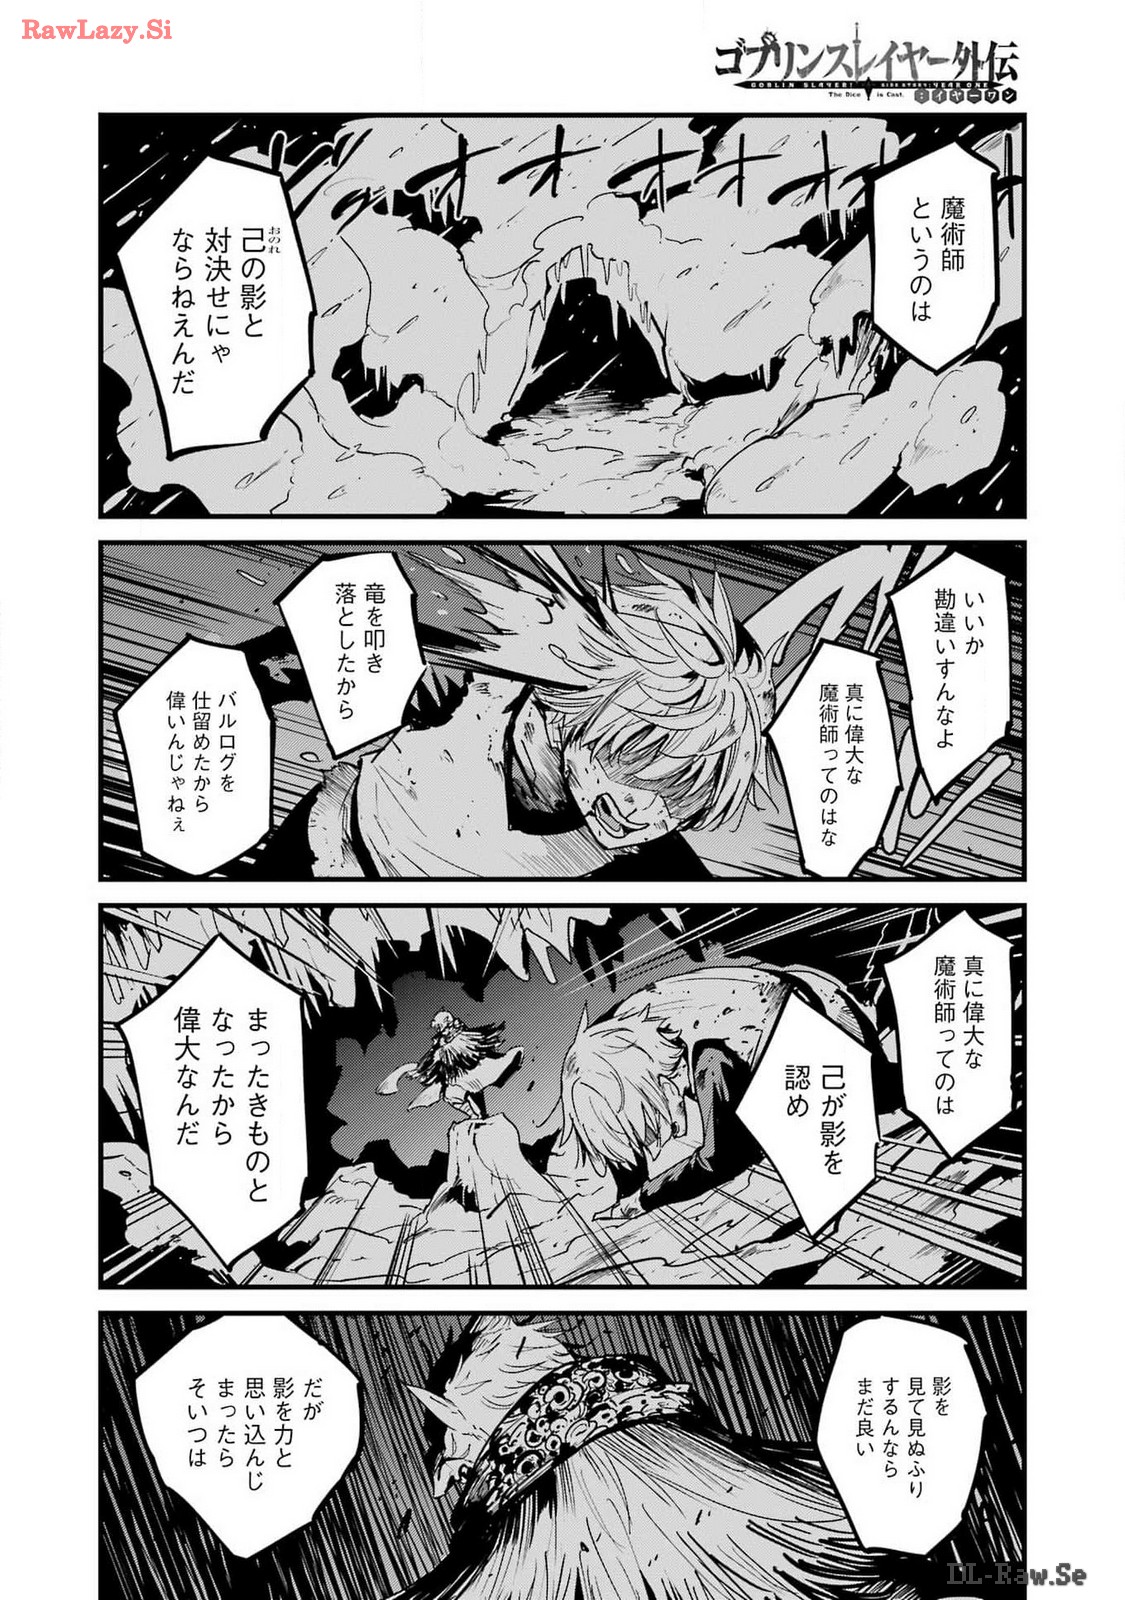 Goblin Slayer: Side Story Year One - Chapter 103 - Page 2